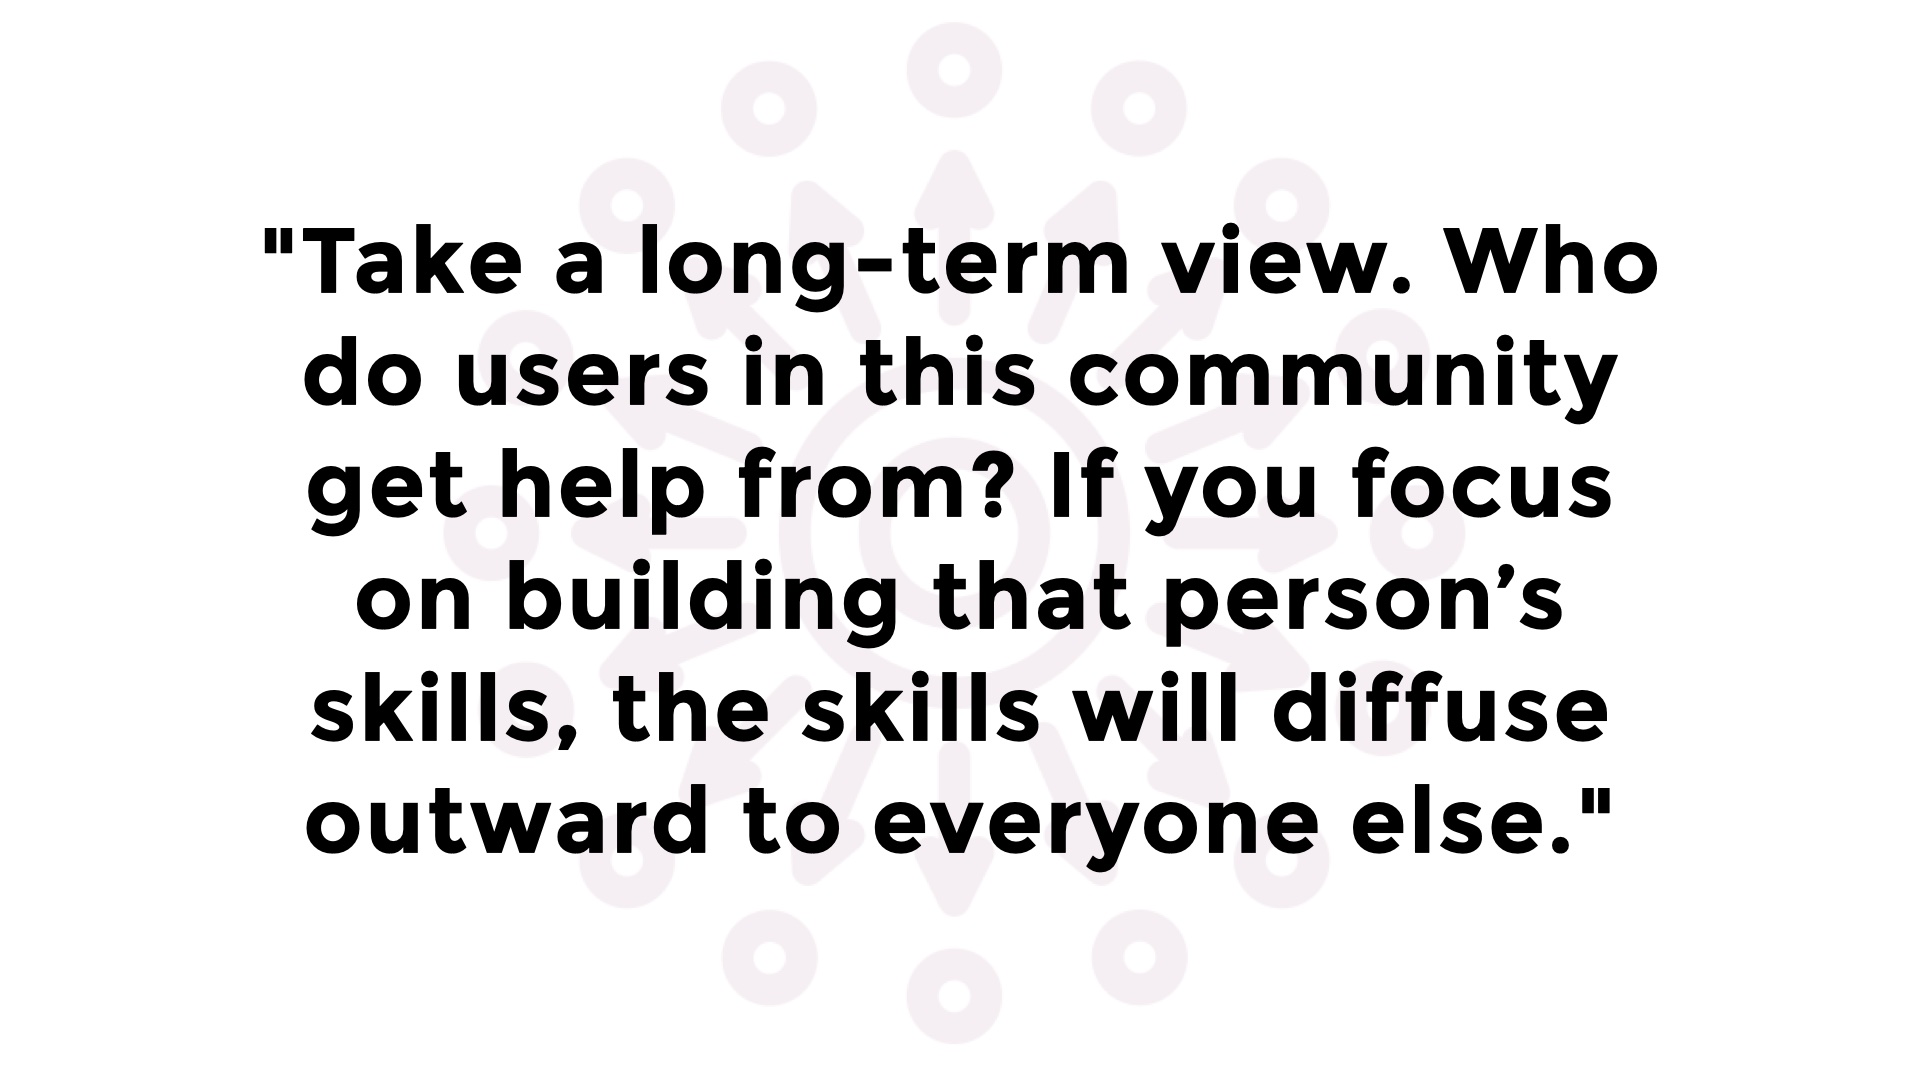 Quotation: 'Take a long-term view. Who do users in this community get help from? If you focus on building that personâ€™s skills, the skills will diffuse outward to everyone else.'